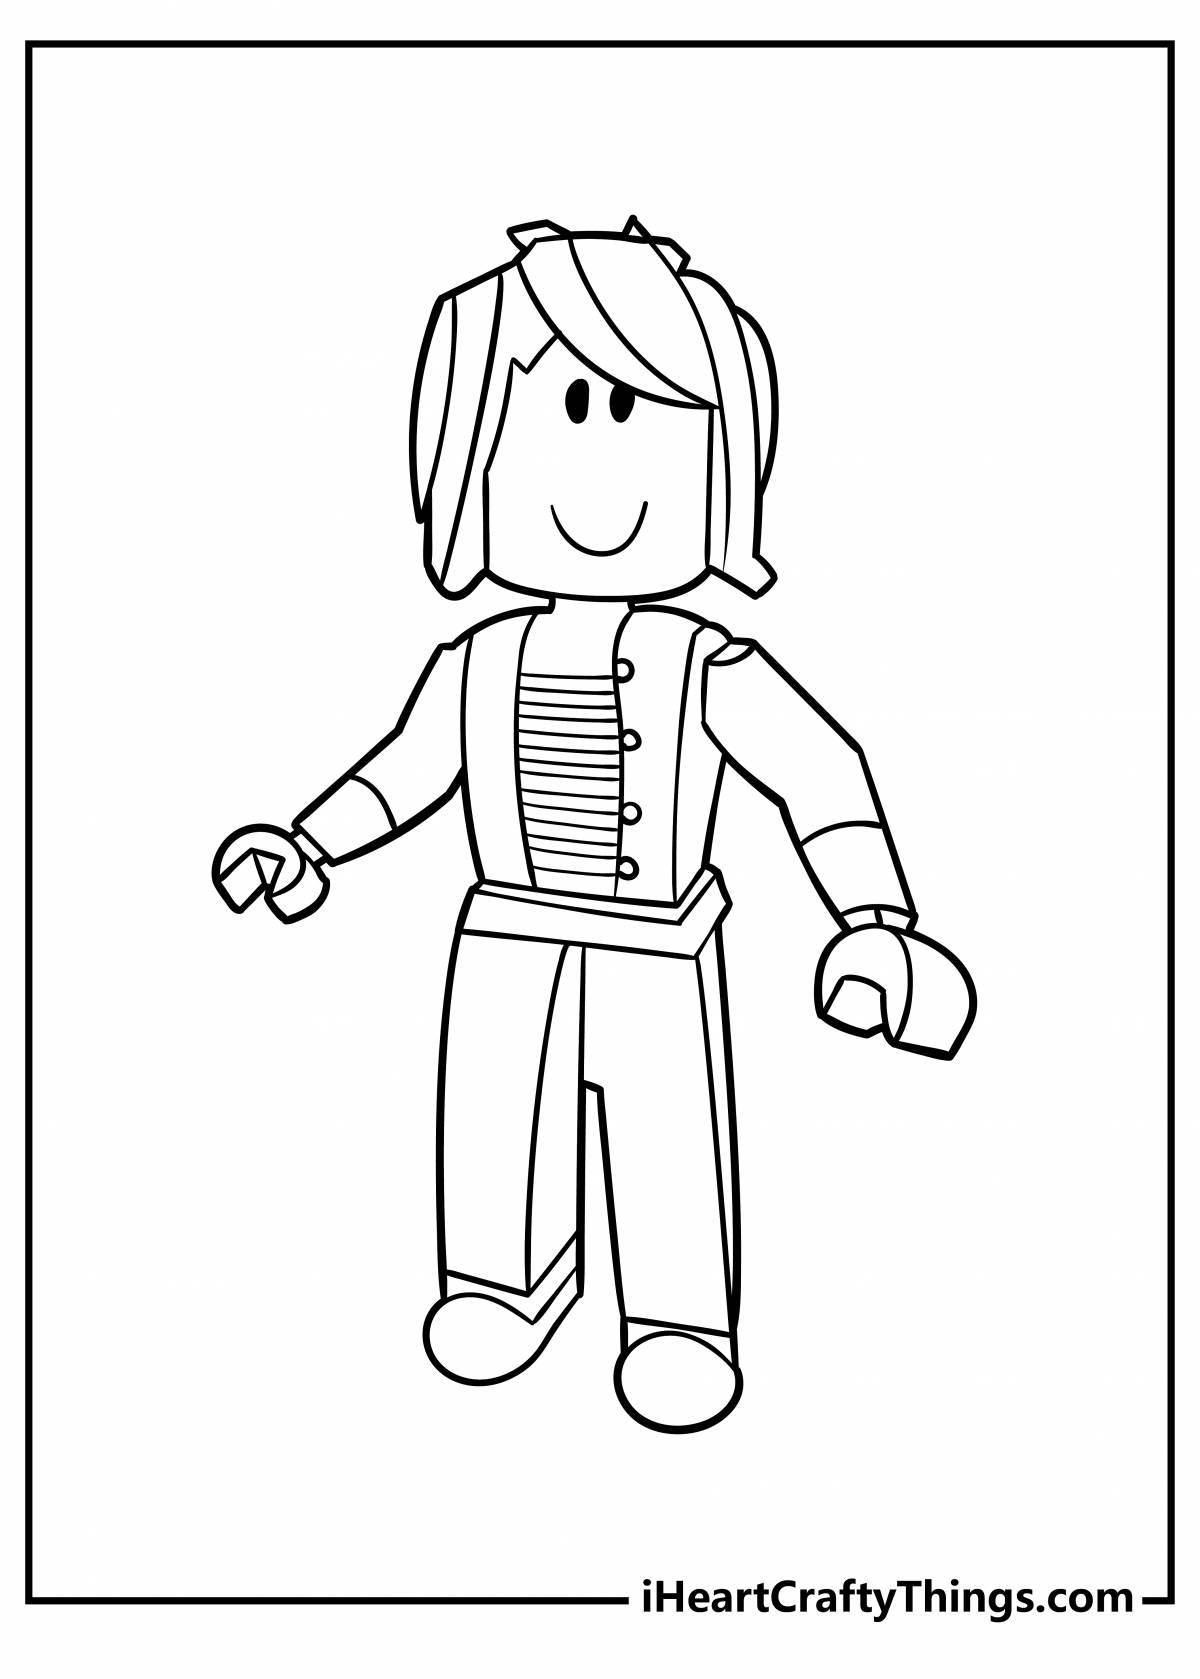 Exciting roblox avatar coloring book